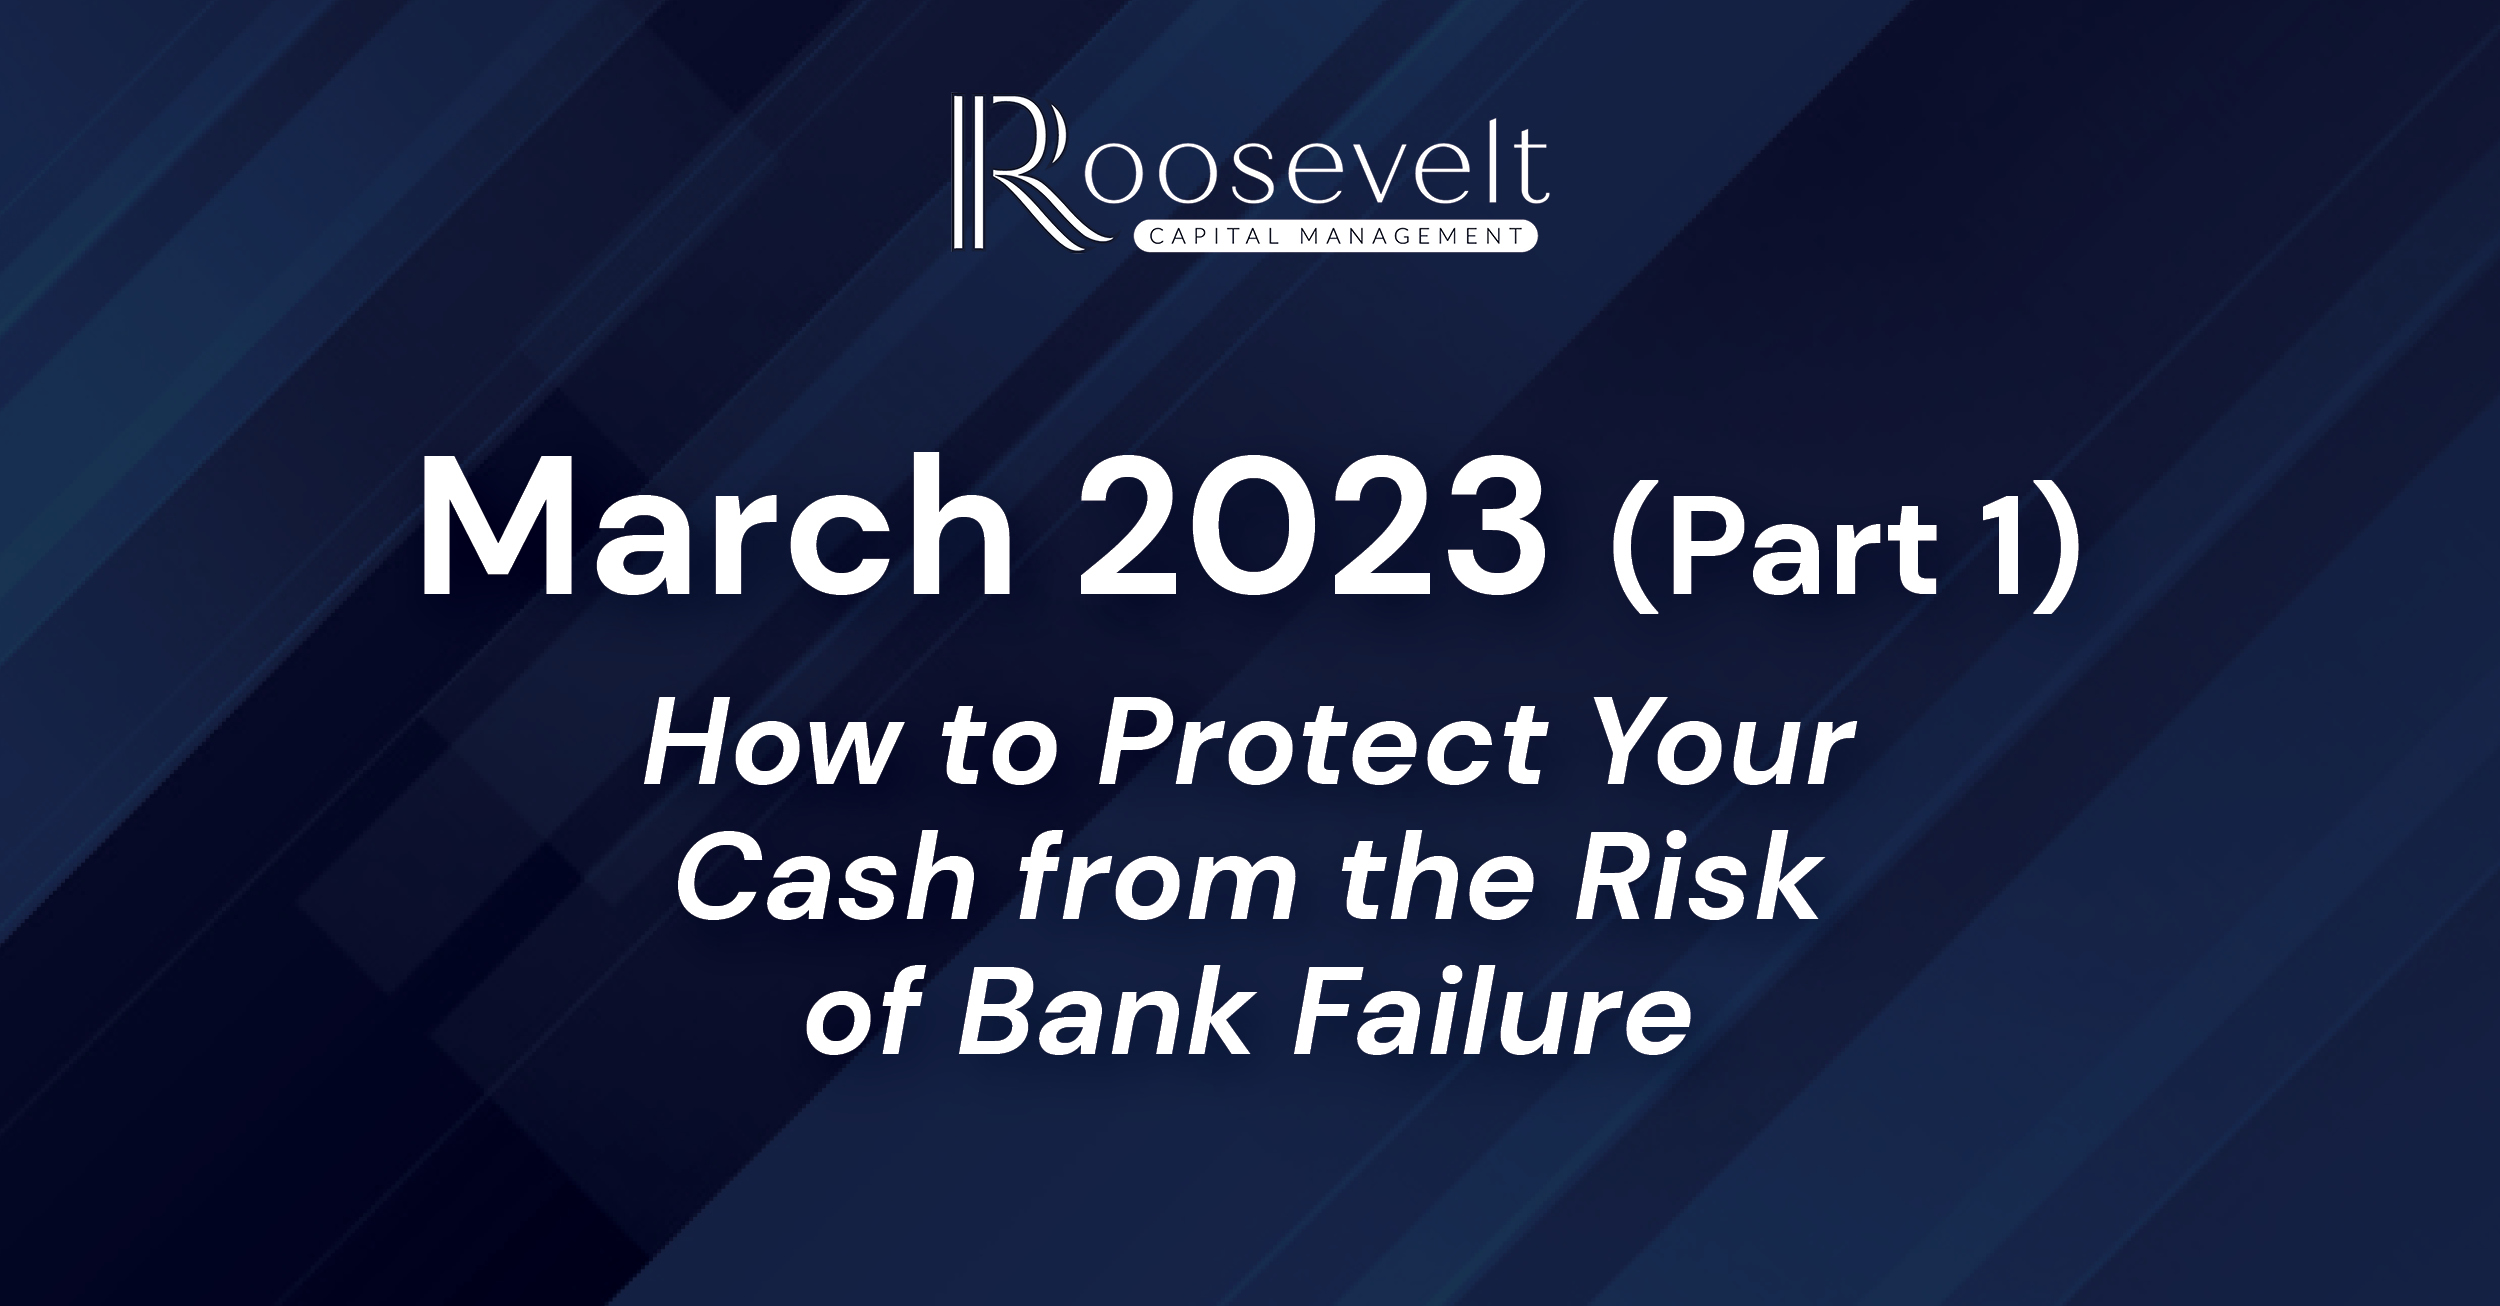 March 2023 (Part I) – How to Protect Your Cash from the Risk of Bank Failure